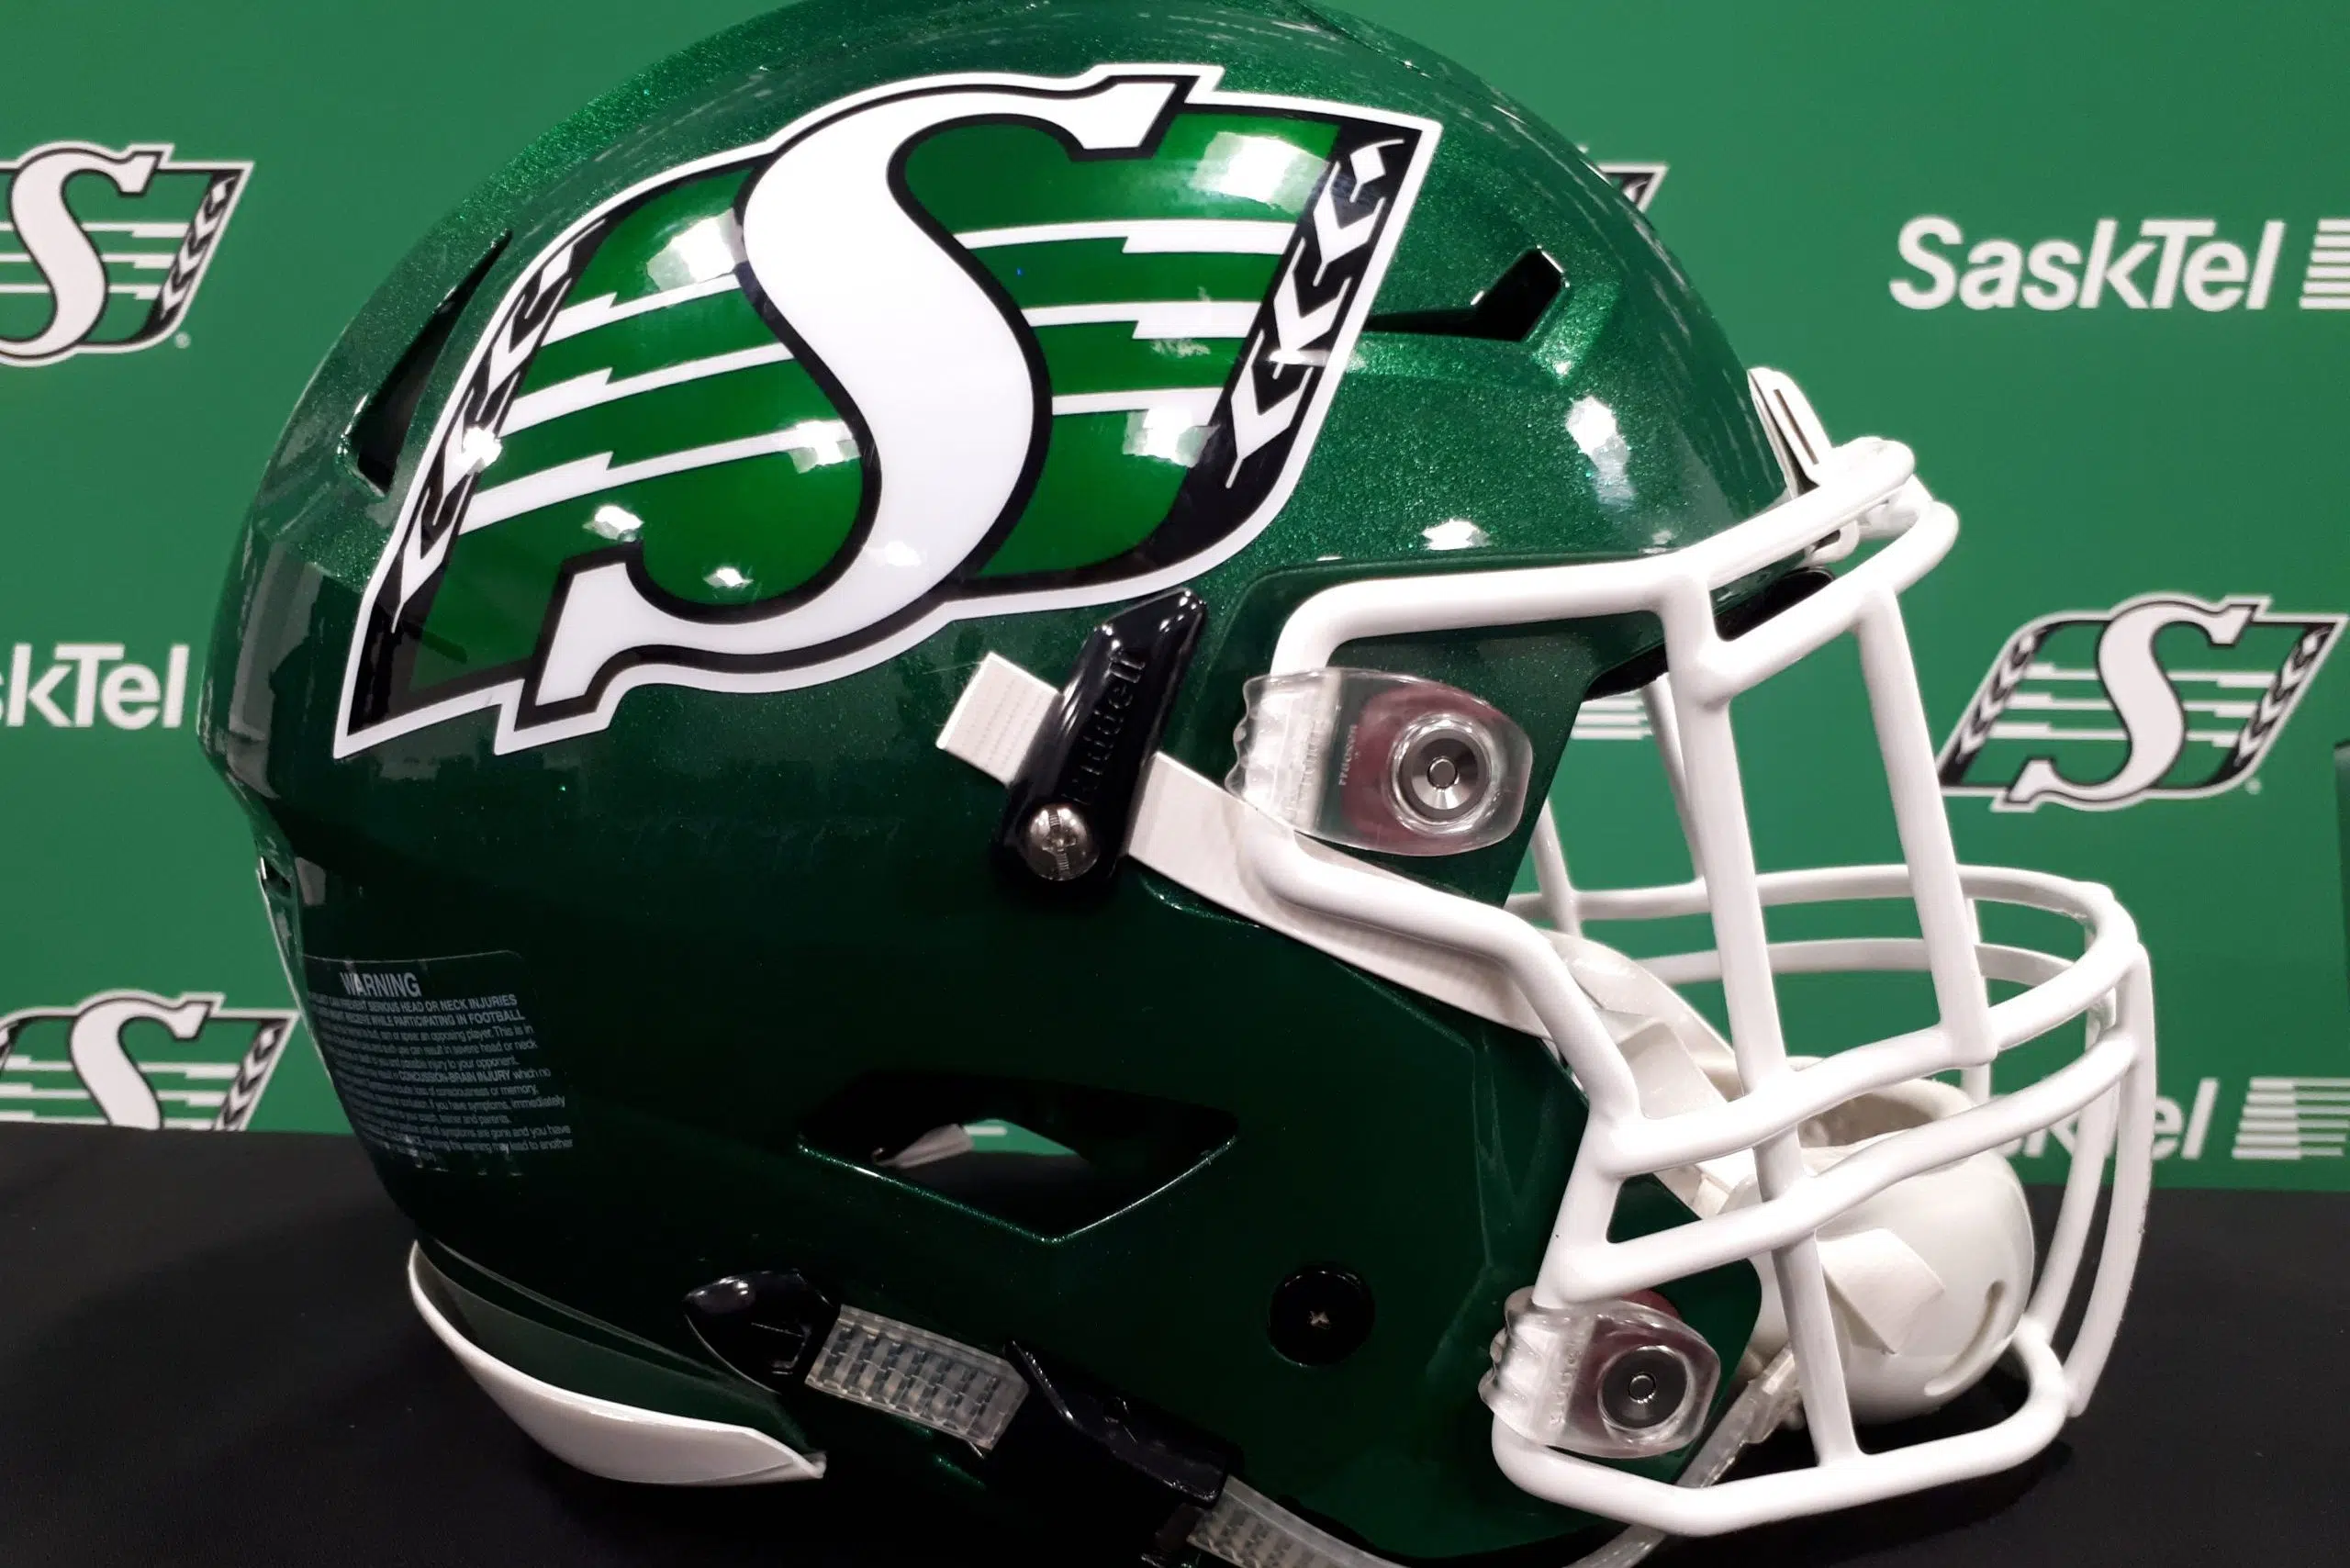 Riders announce signings of two Canadians